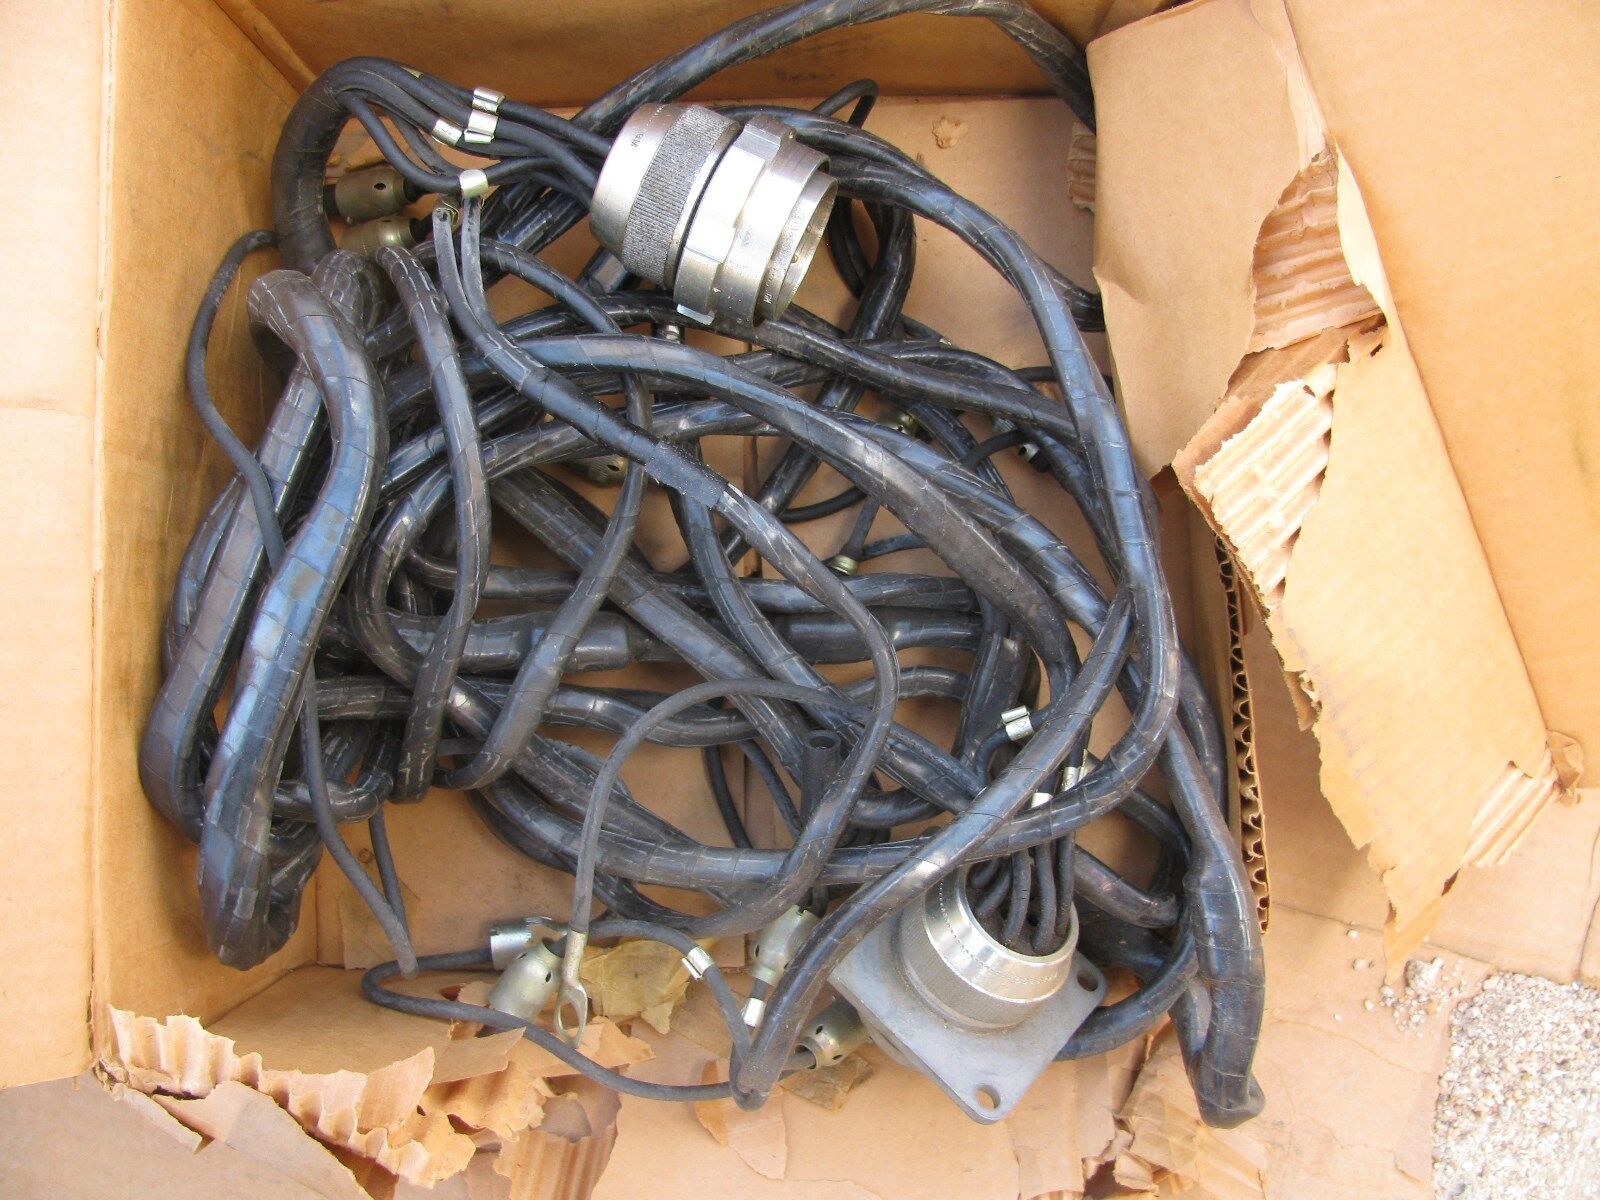 G744 G749?? DOUGLAS CONNECTOR M SERIES REAR WIREING HARNESS PN 8327046